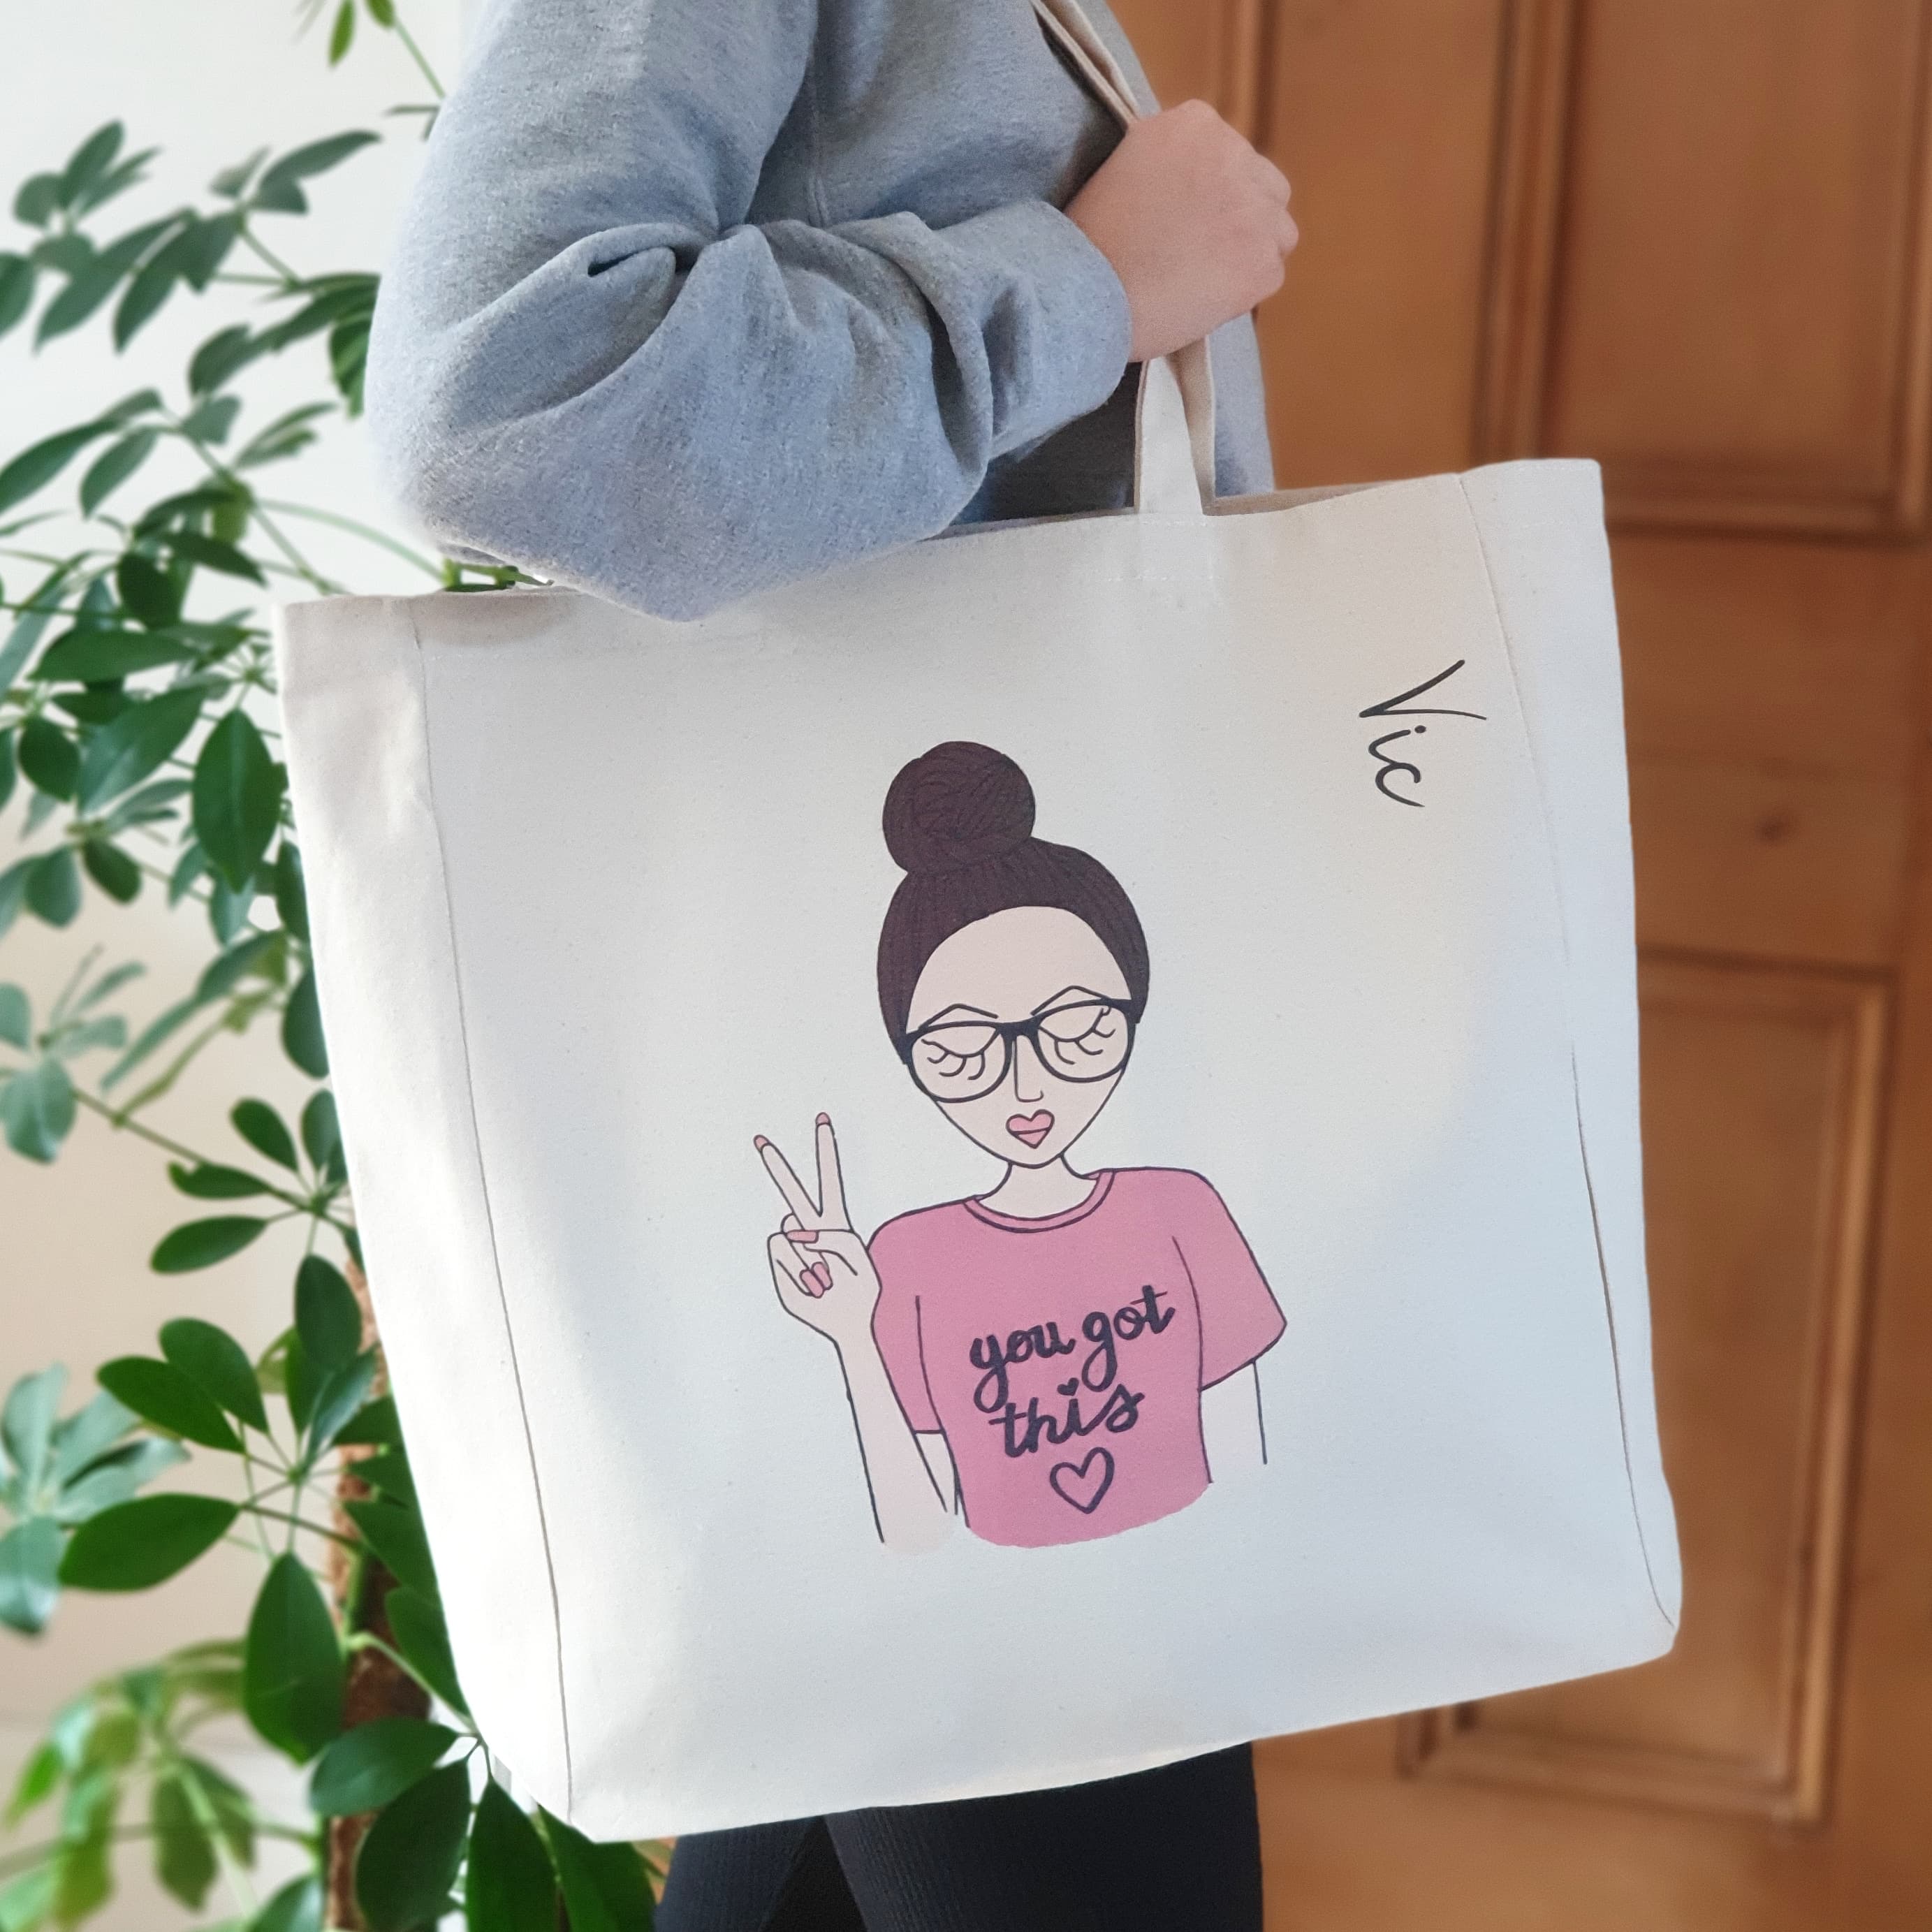 The Personalised Tote Bag